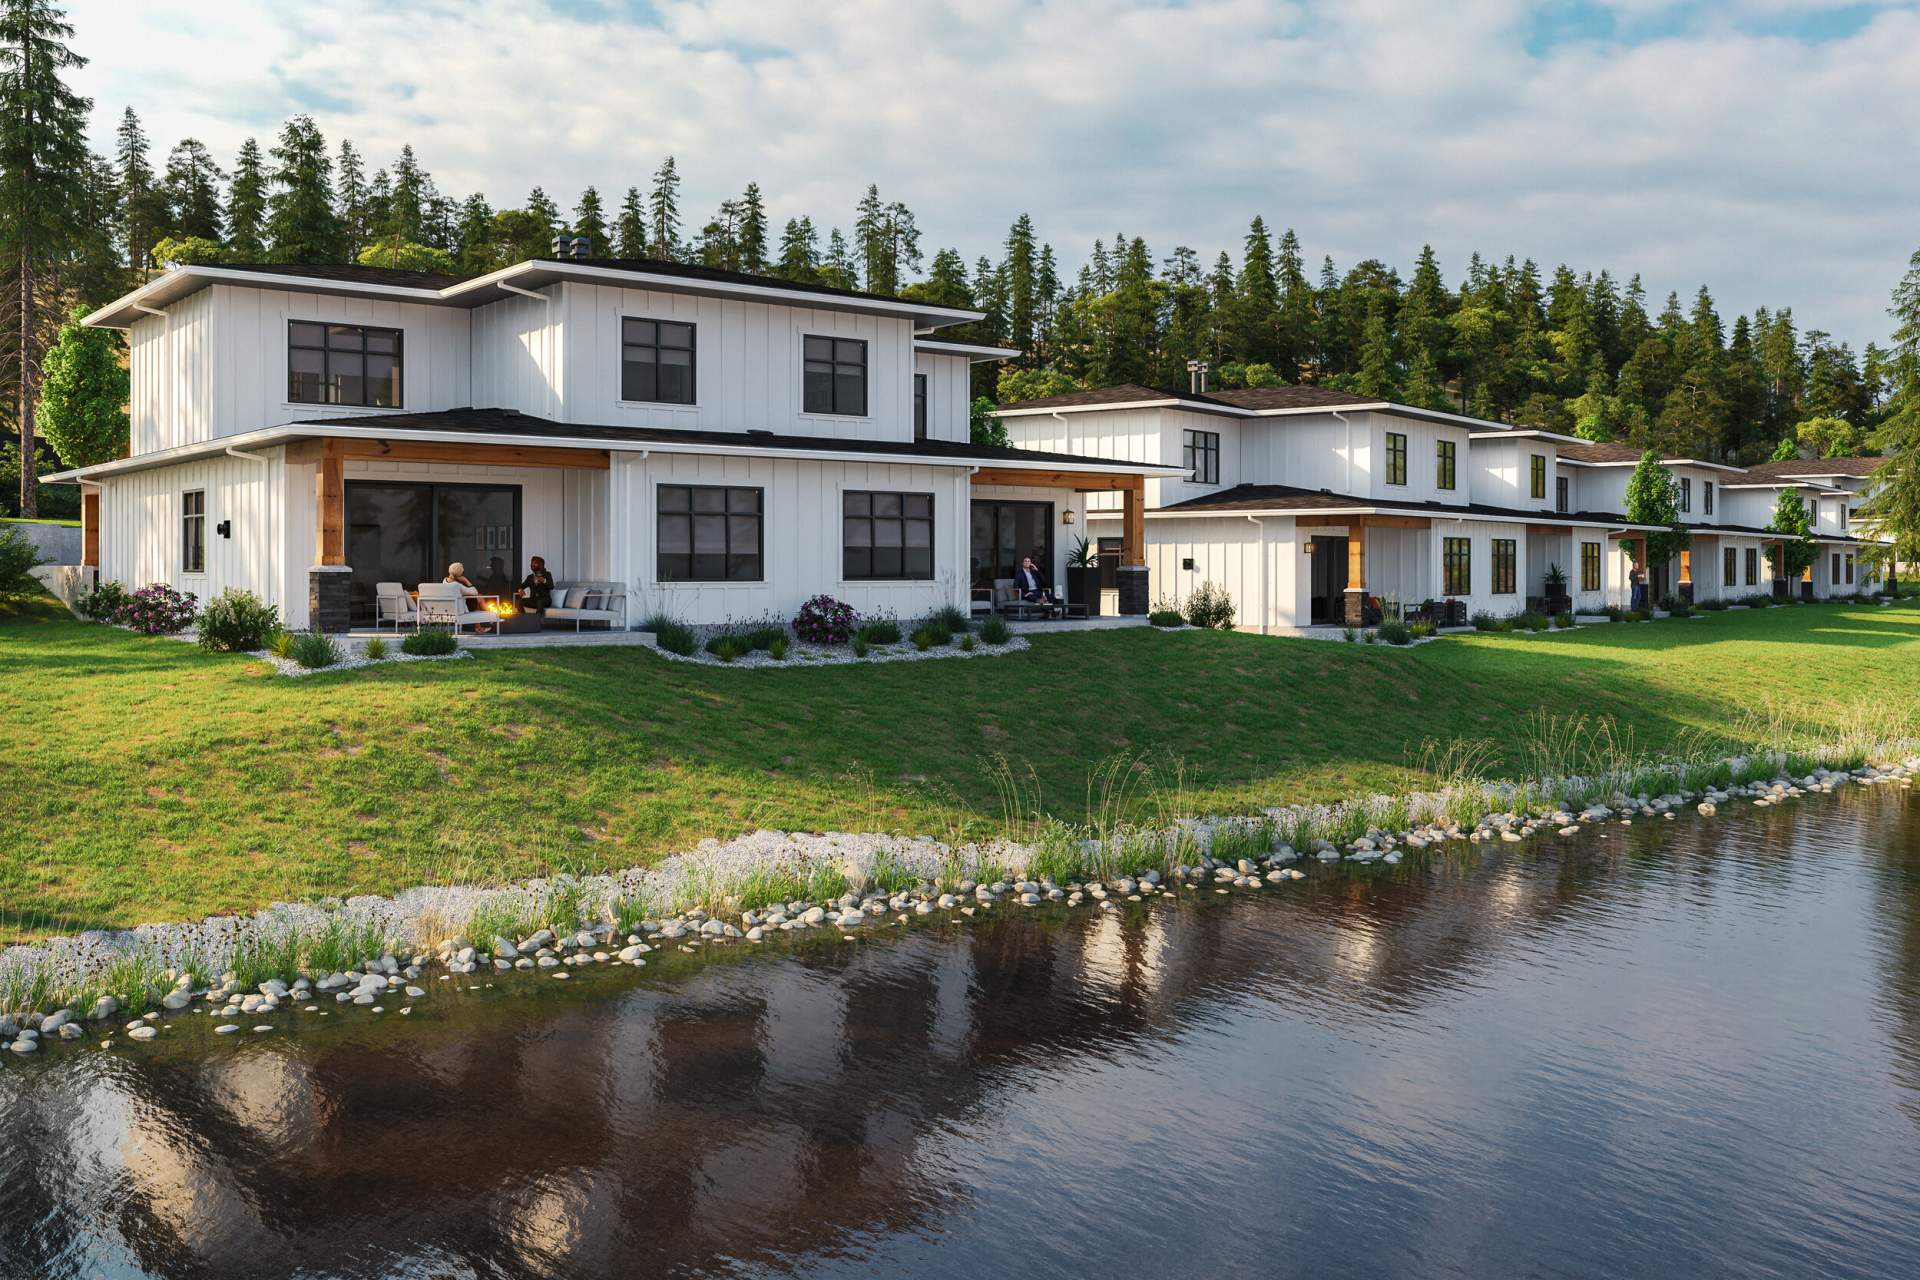 A collection of 24 North Kelowna golf course townhomes at The Okanagan Golf Club.